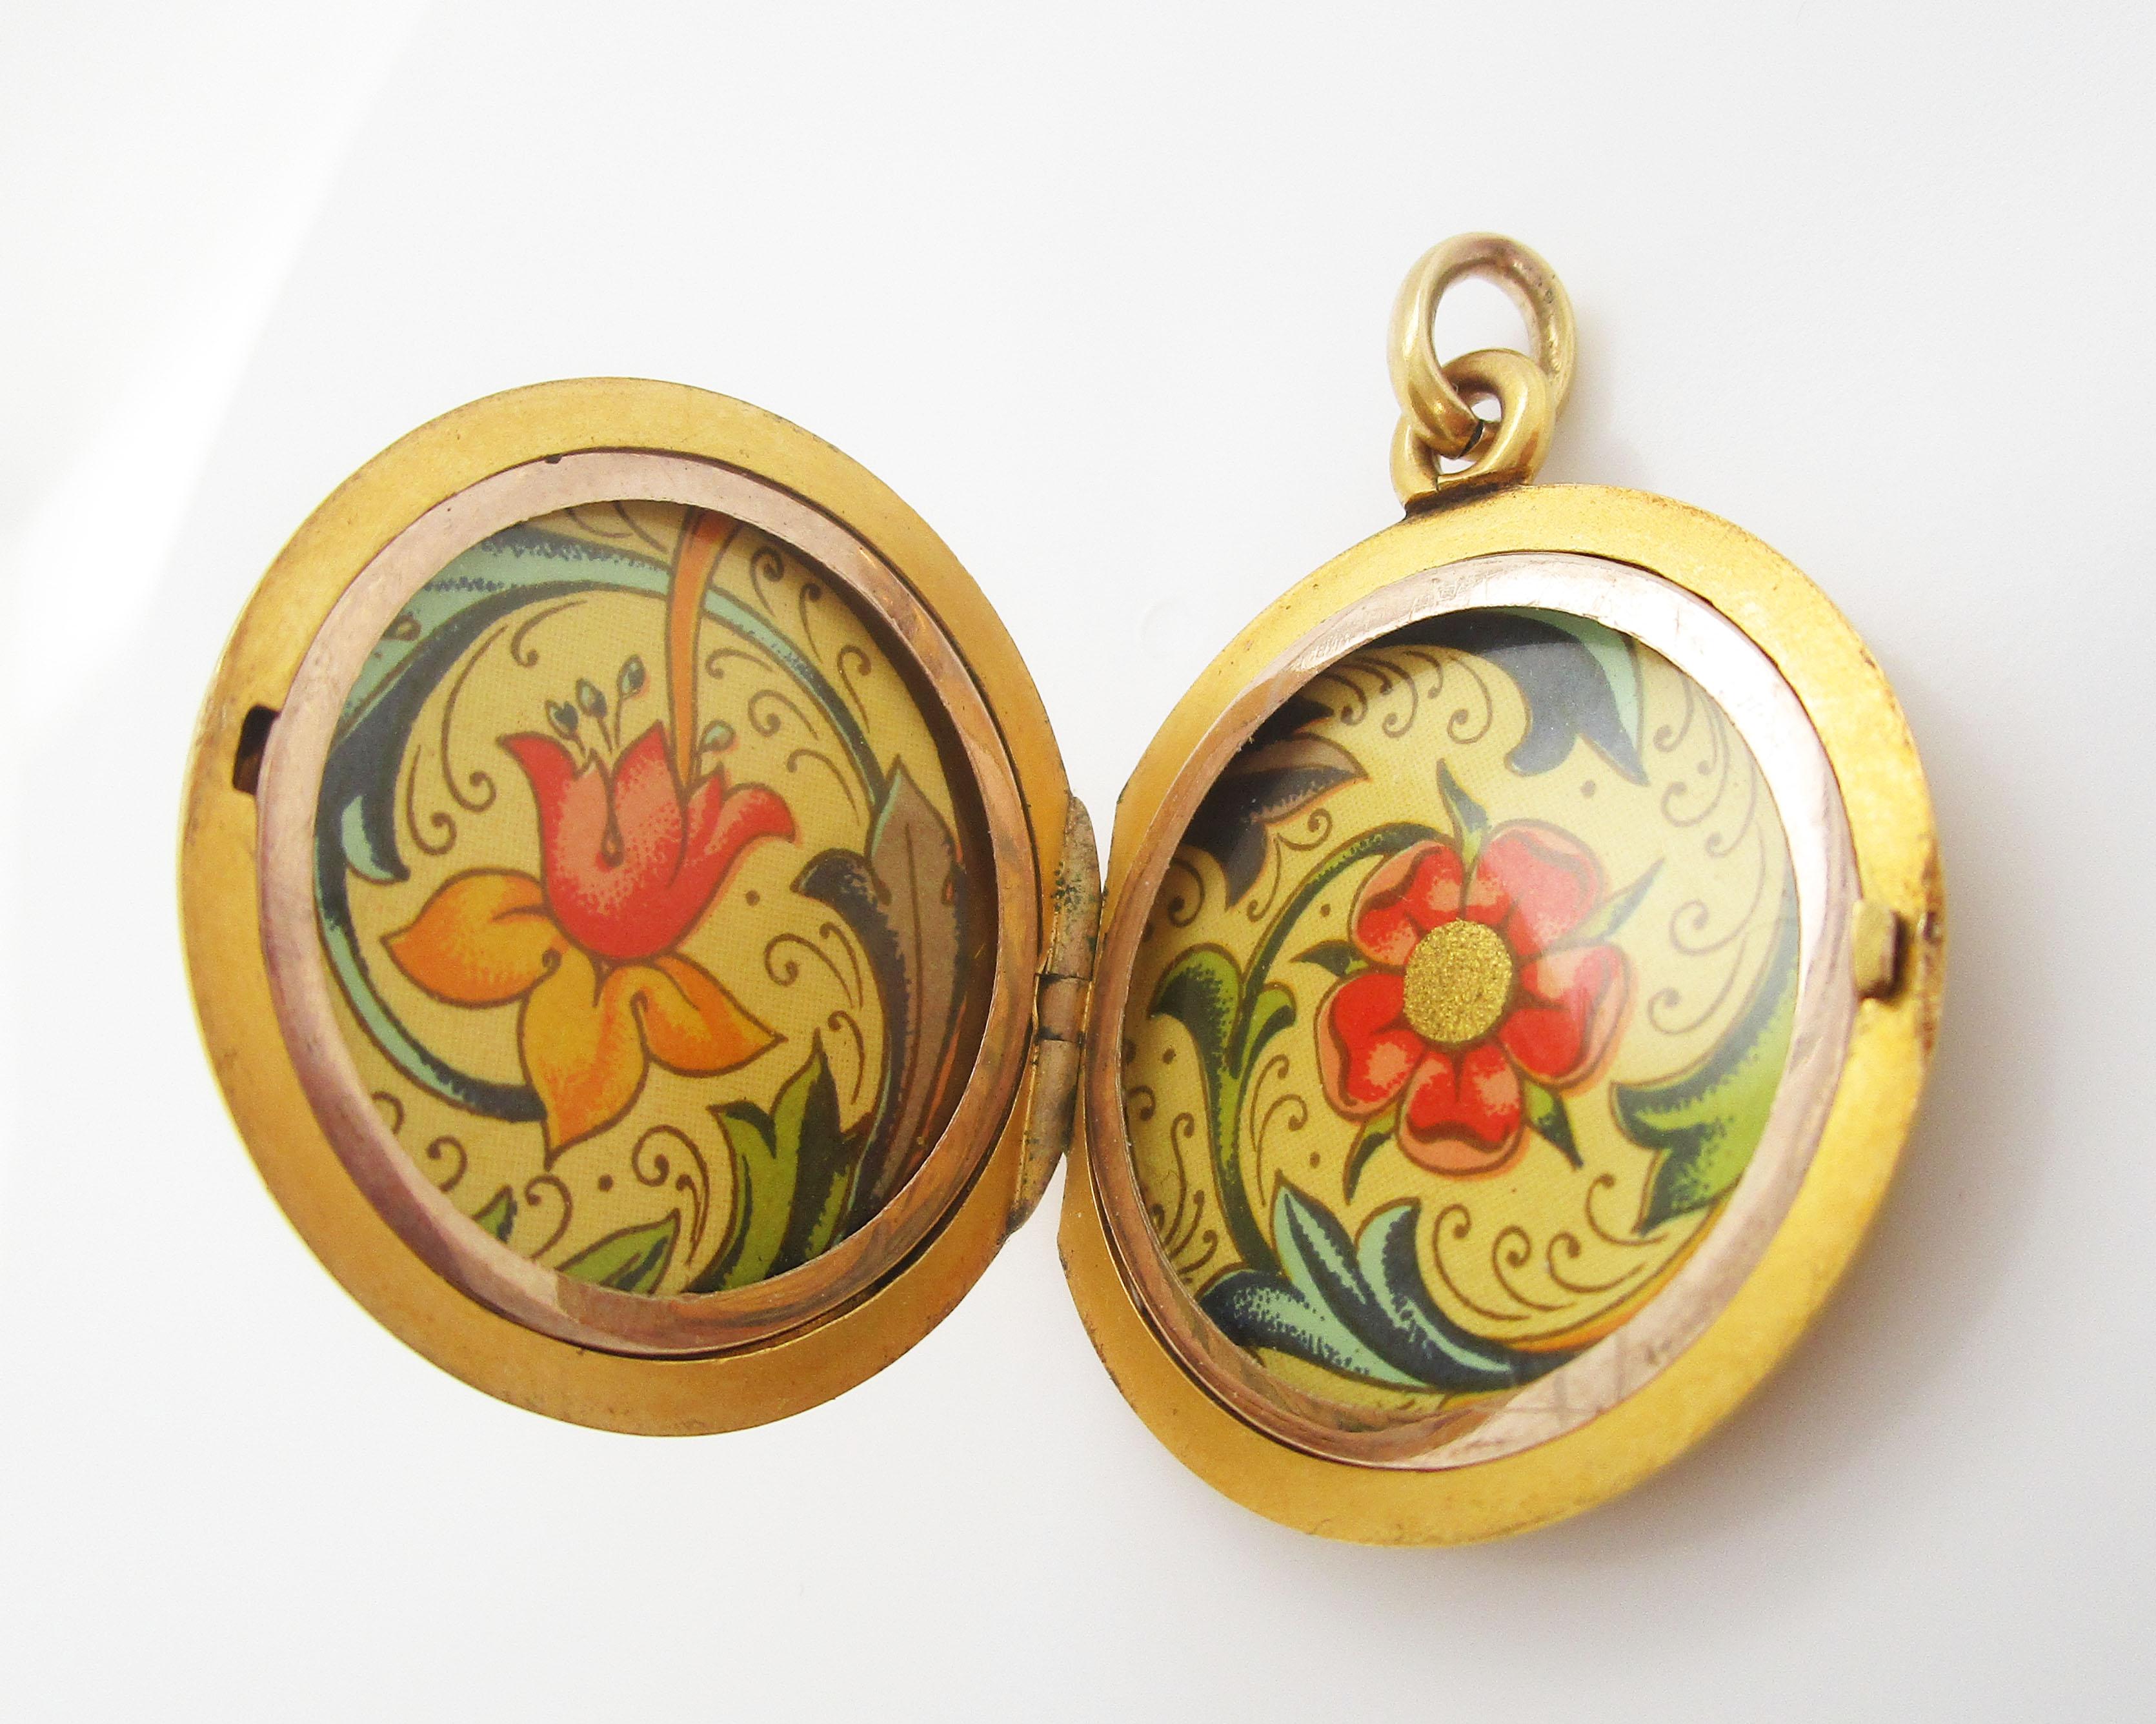 1890 Victorian 14 Karat Yellow Gold Monogrammed Locket In Excellent Condition For Sale In Lexington, KY